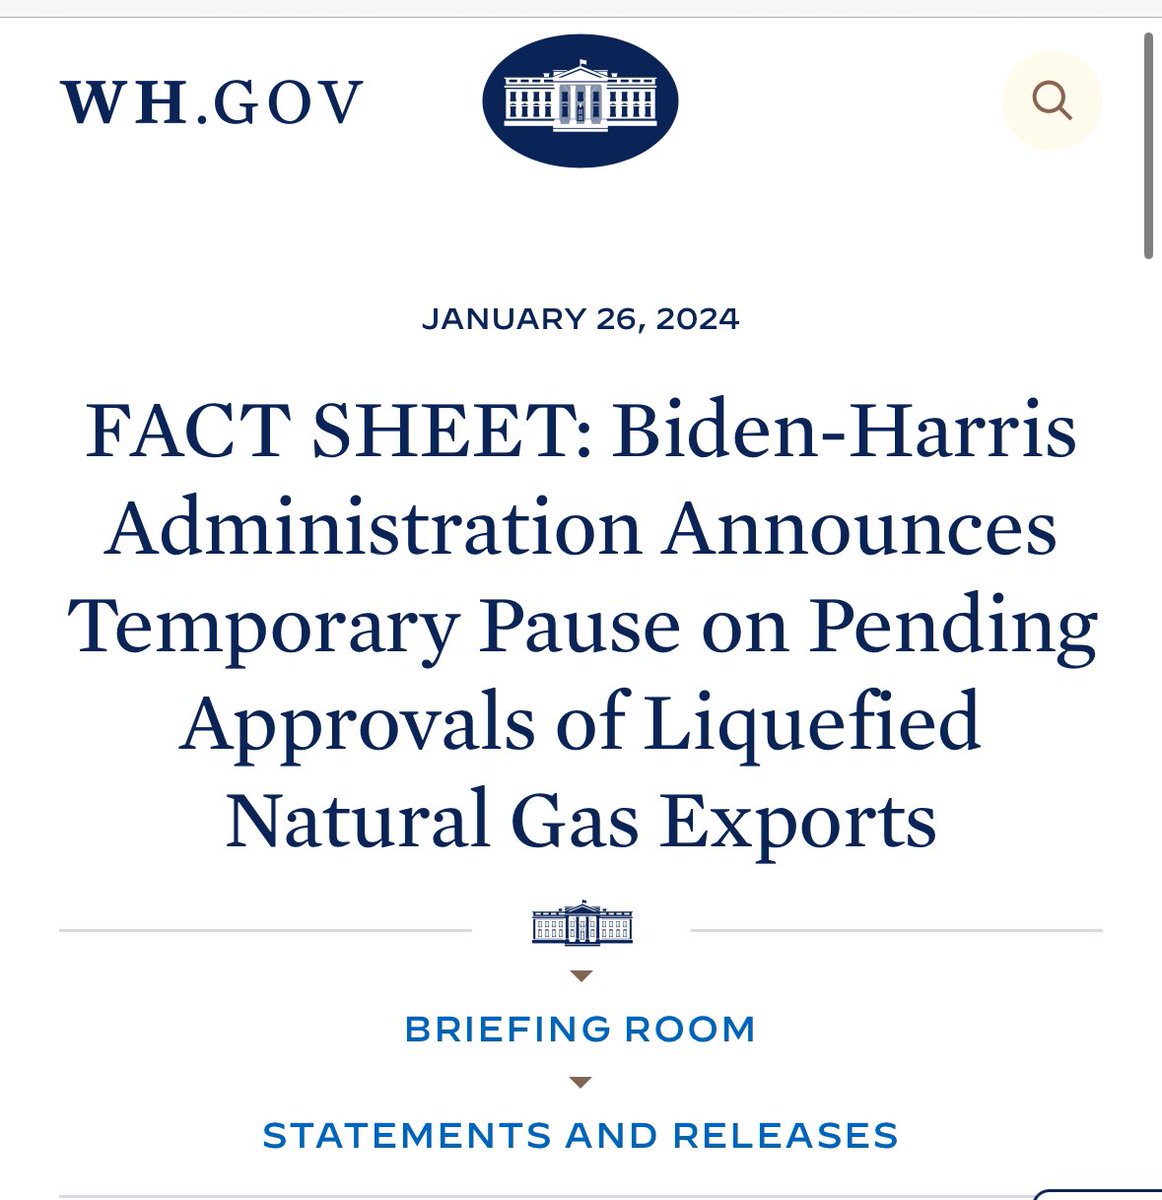 IT’S OFFICIAL: The White House just announced that Department of Energy is pausing all new LNG export terminals!! This halts nearly 20 LNG terminals representing 675 coal fired power plants worth of emissions. It’s a historic day in the fight against fossil fuels.